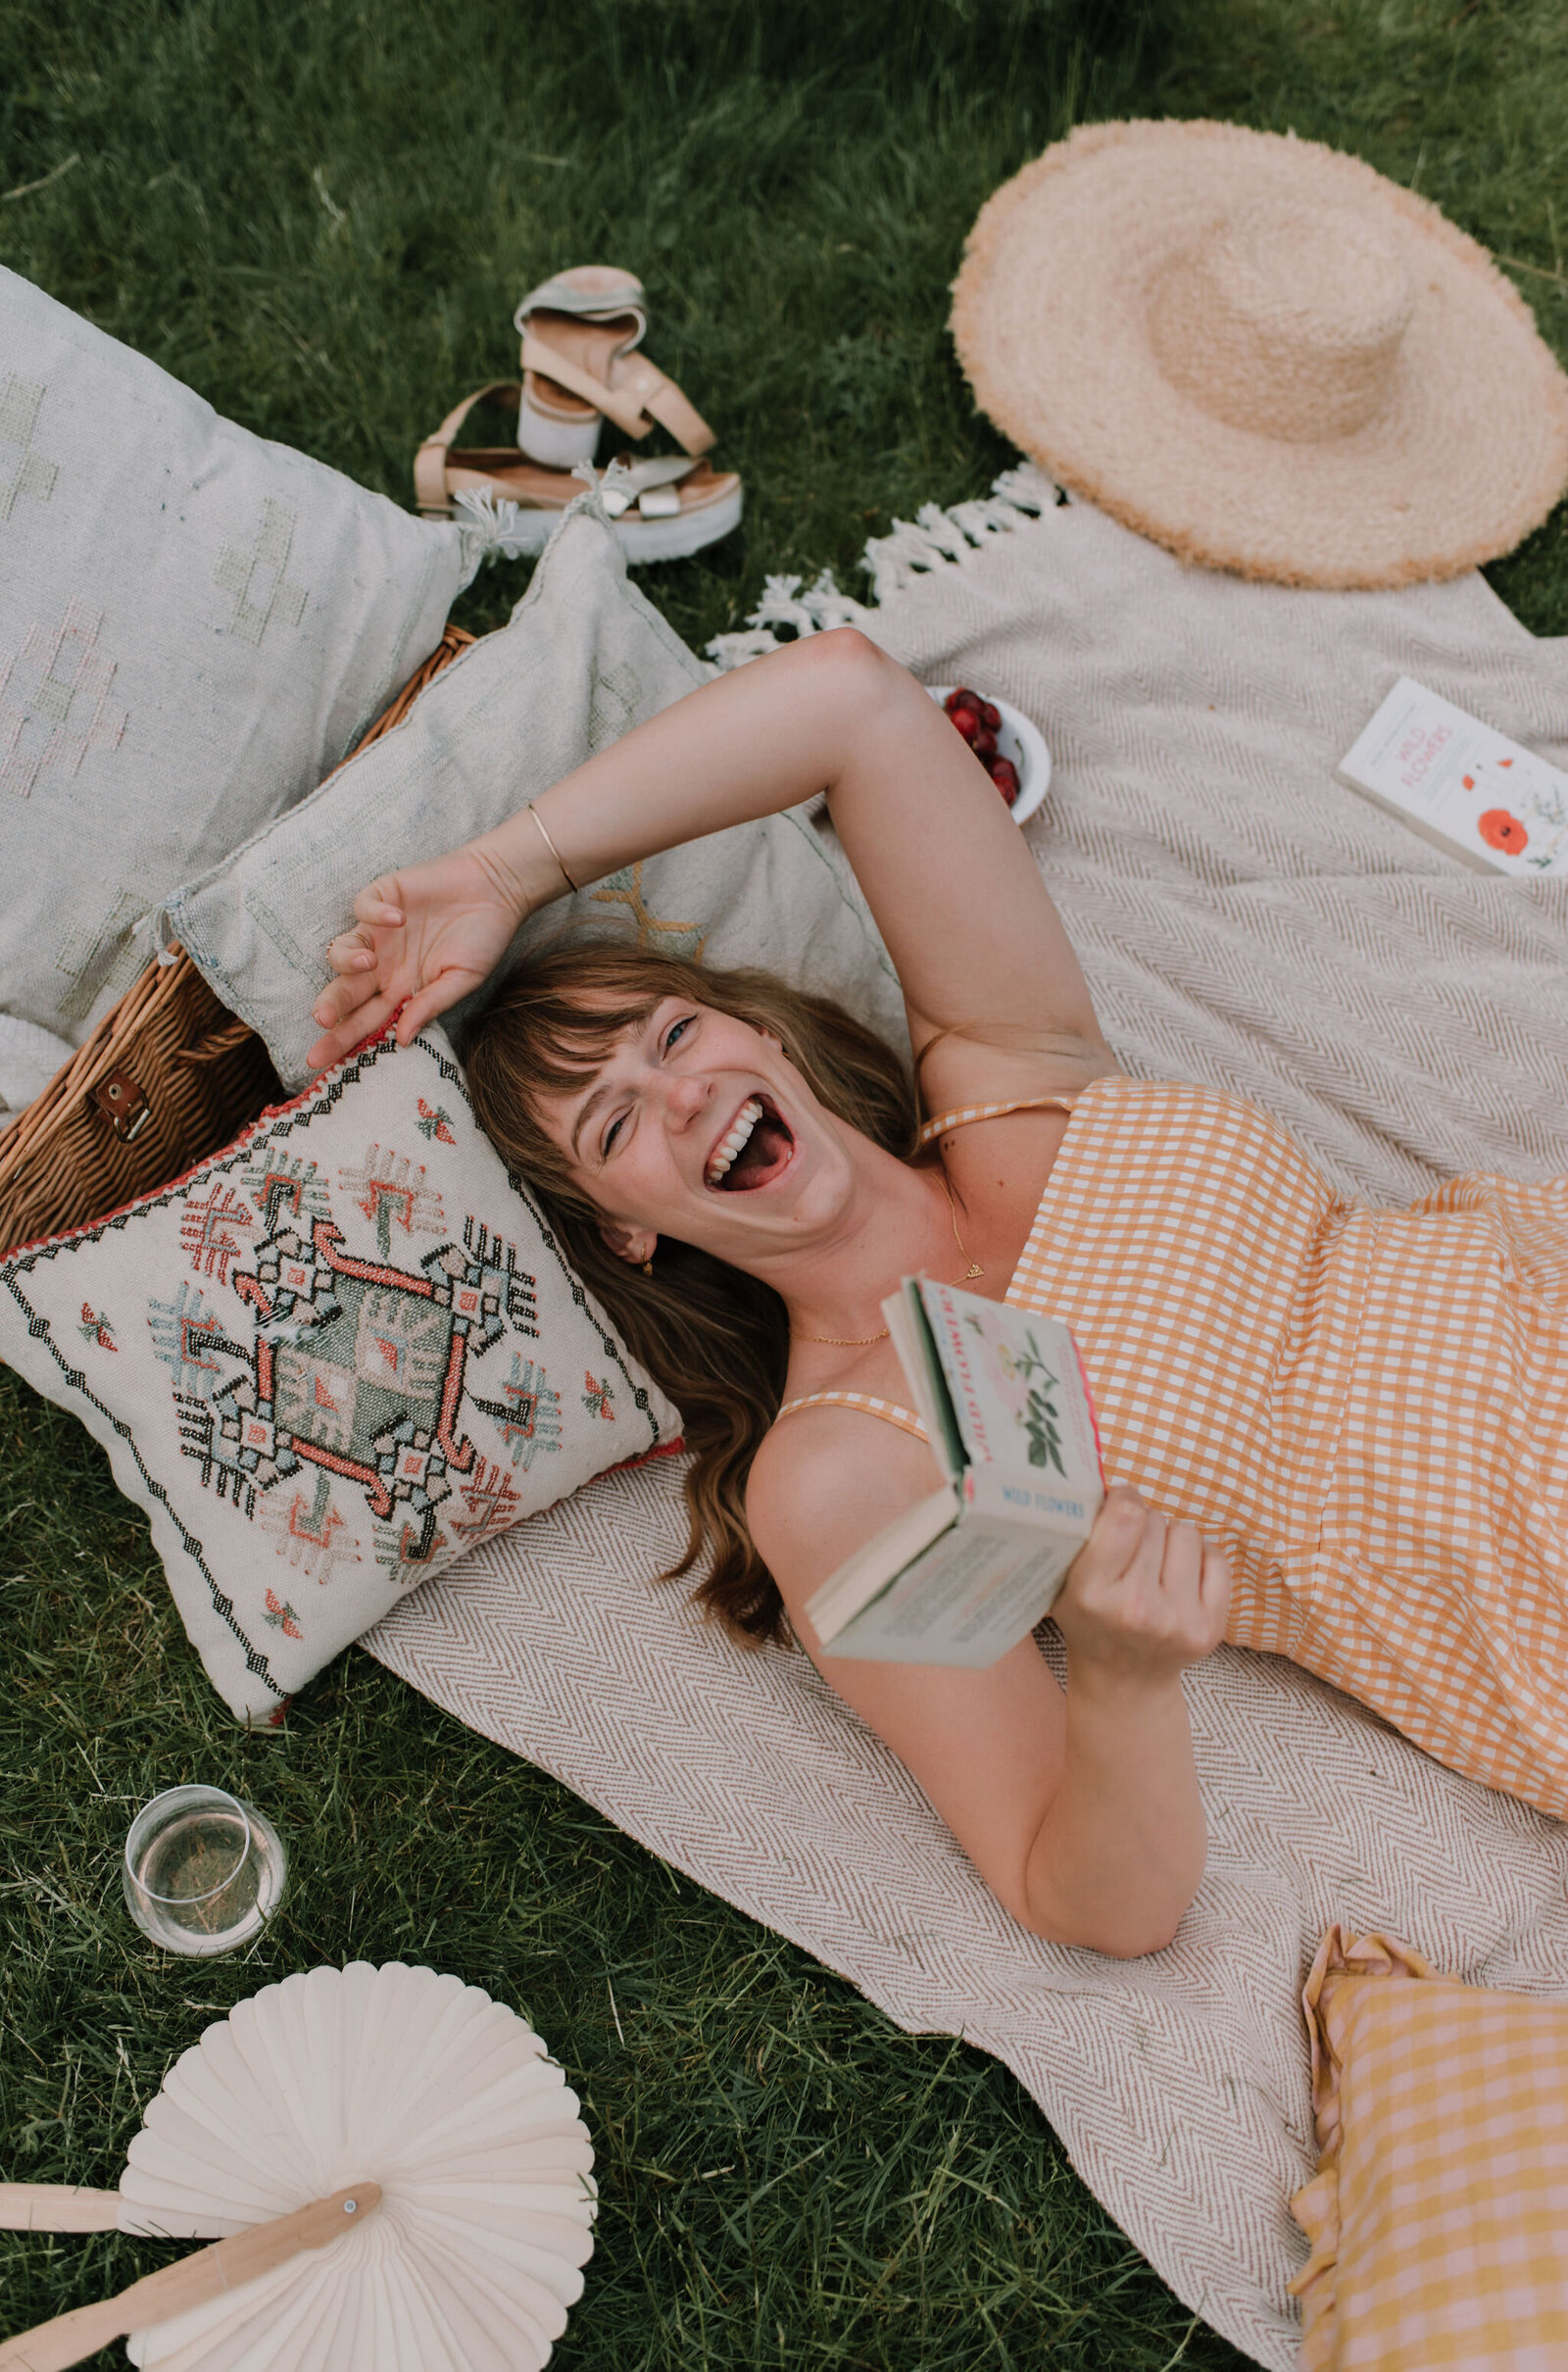 woman reading a book is laying on the grass surrounded by cushions and gingham patters, she is laughing